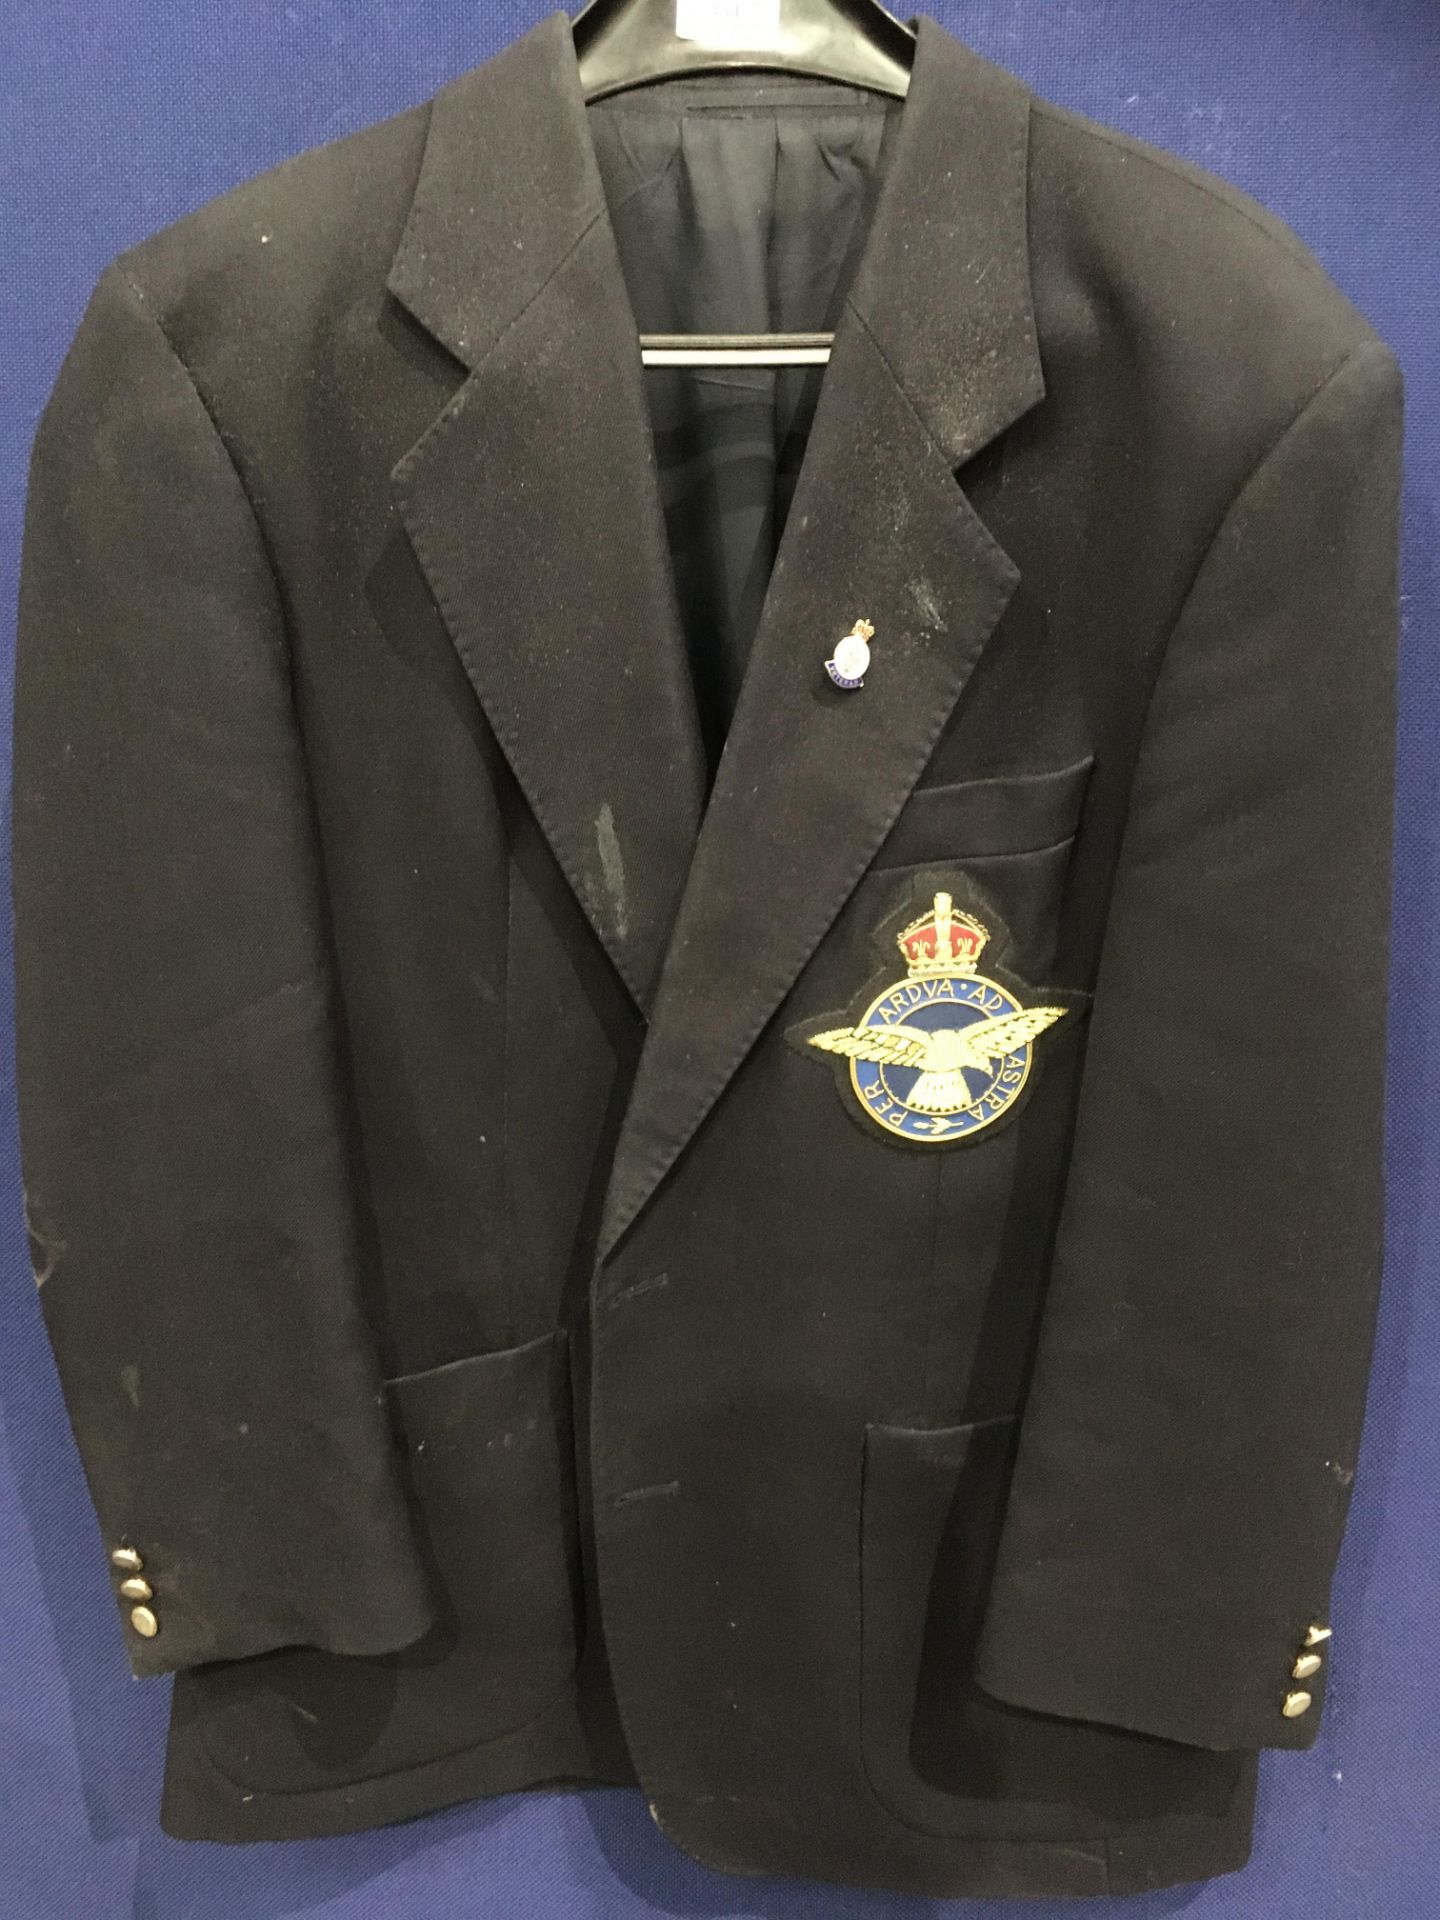 A Berwin and Berwin gentleman's blue jacket - no size shown with RAF badge and HM Armed Forces